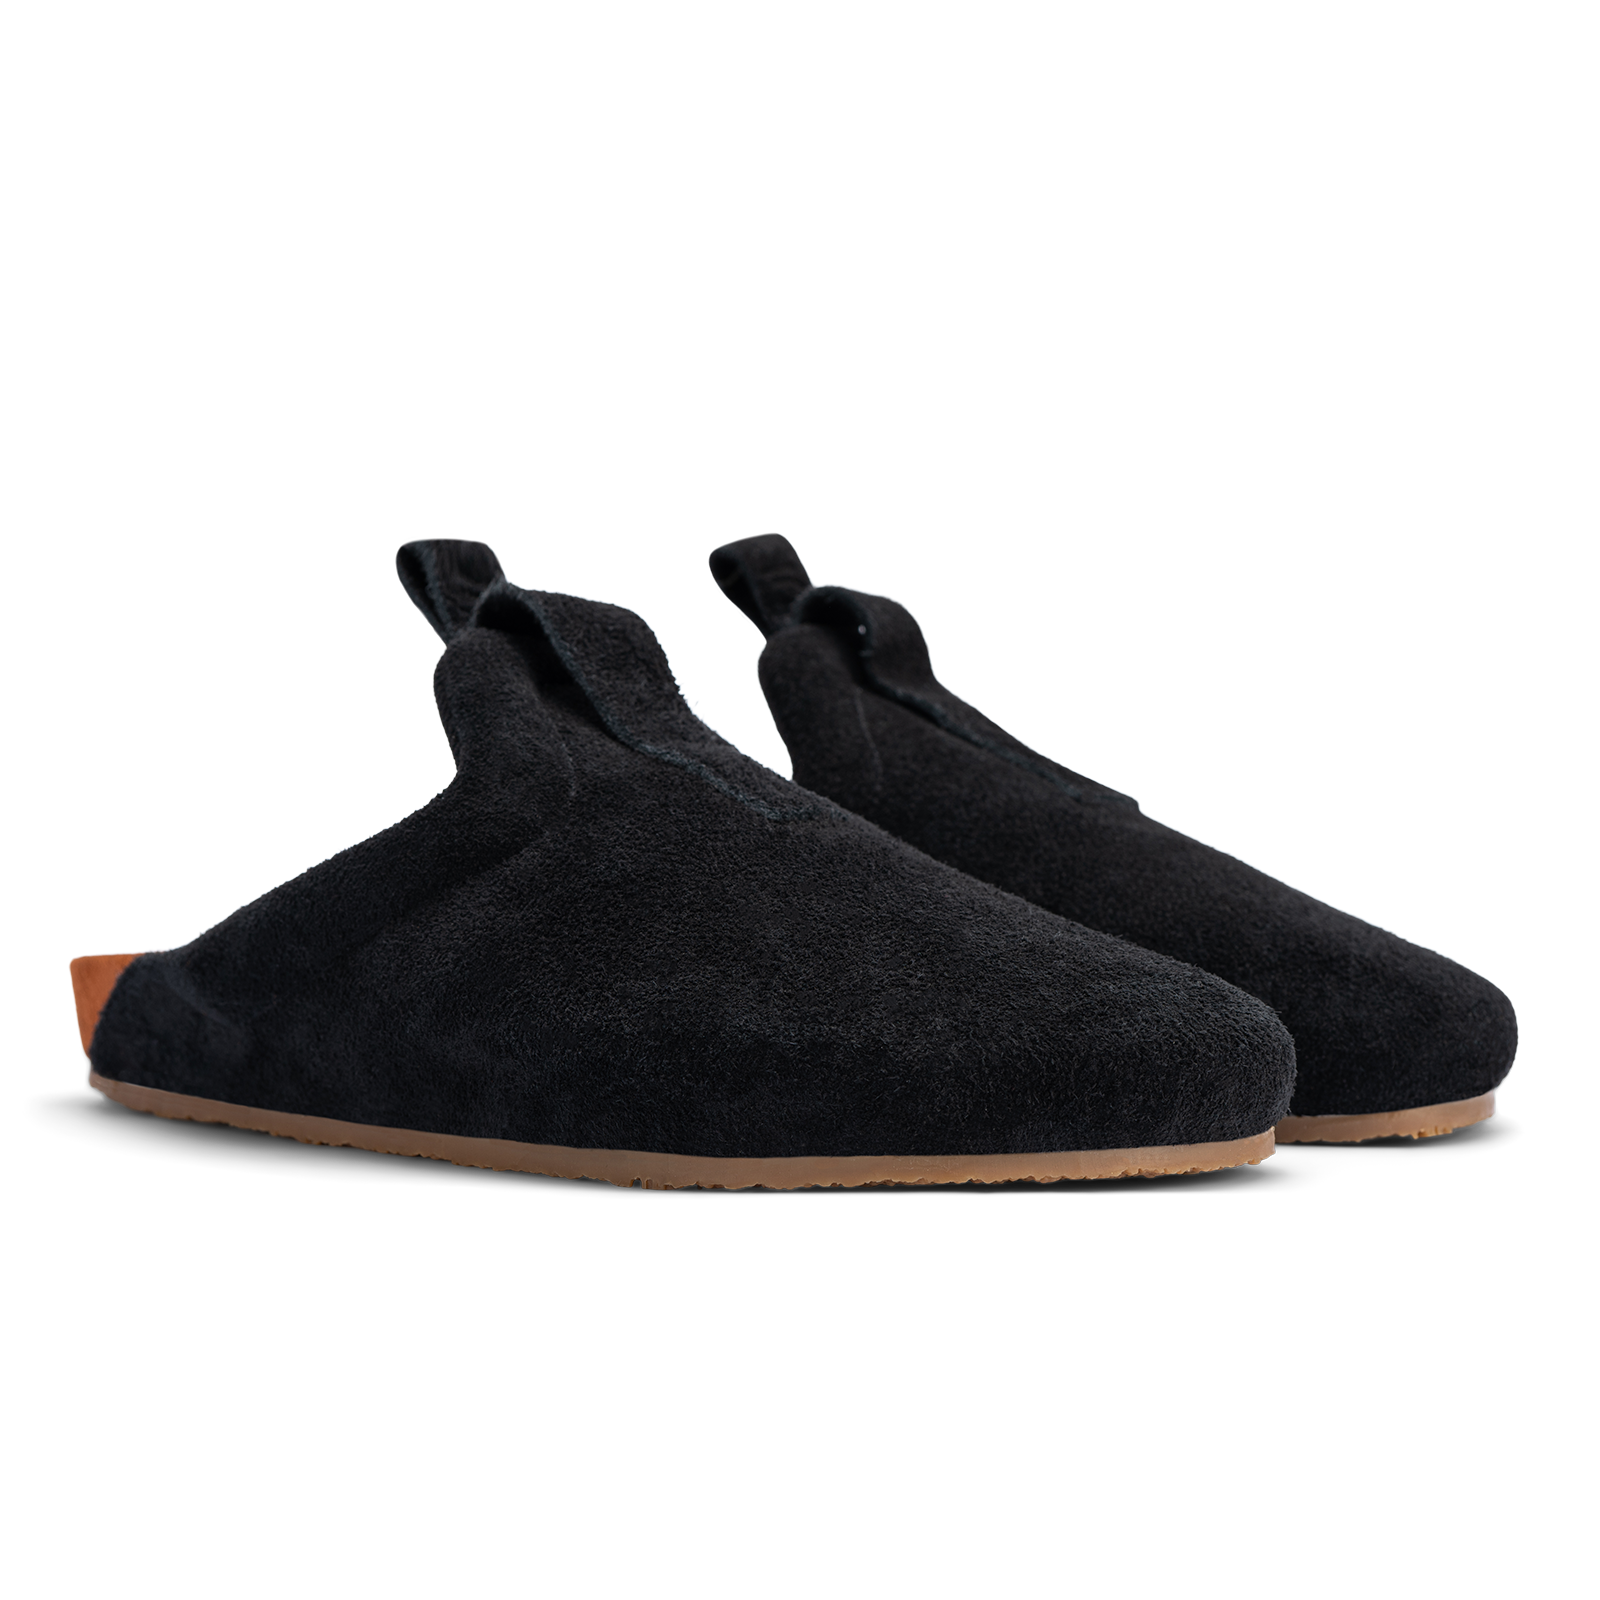 3/4 view Bantha Black suede upper, cork midsole wrapped in soft suede, Vibram sheet gum rubber outsole